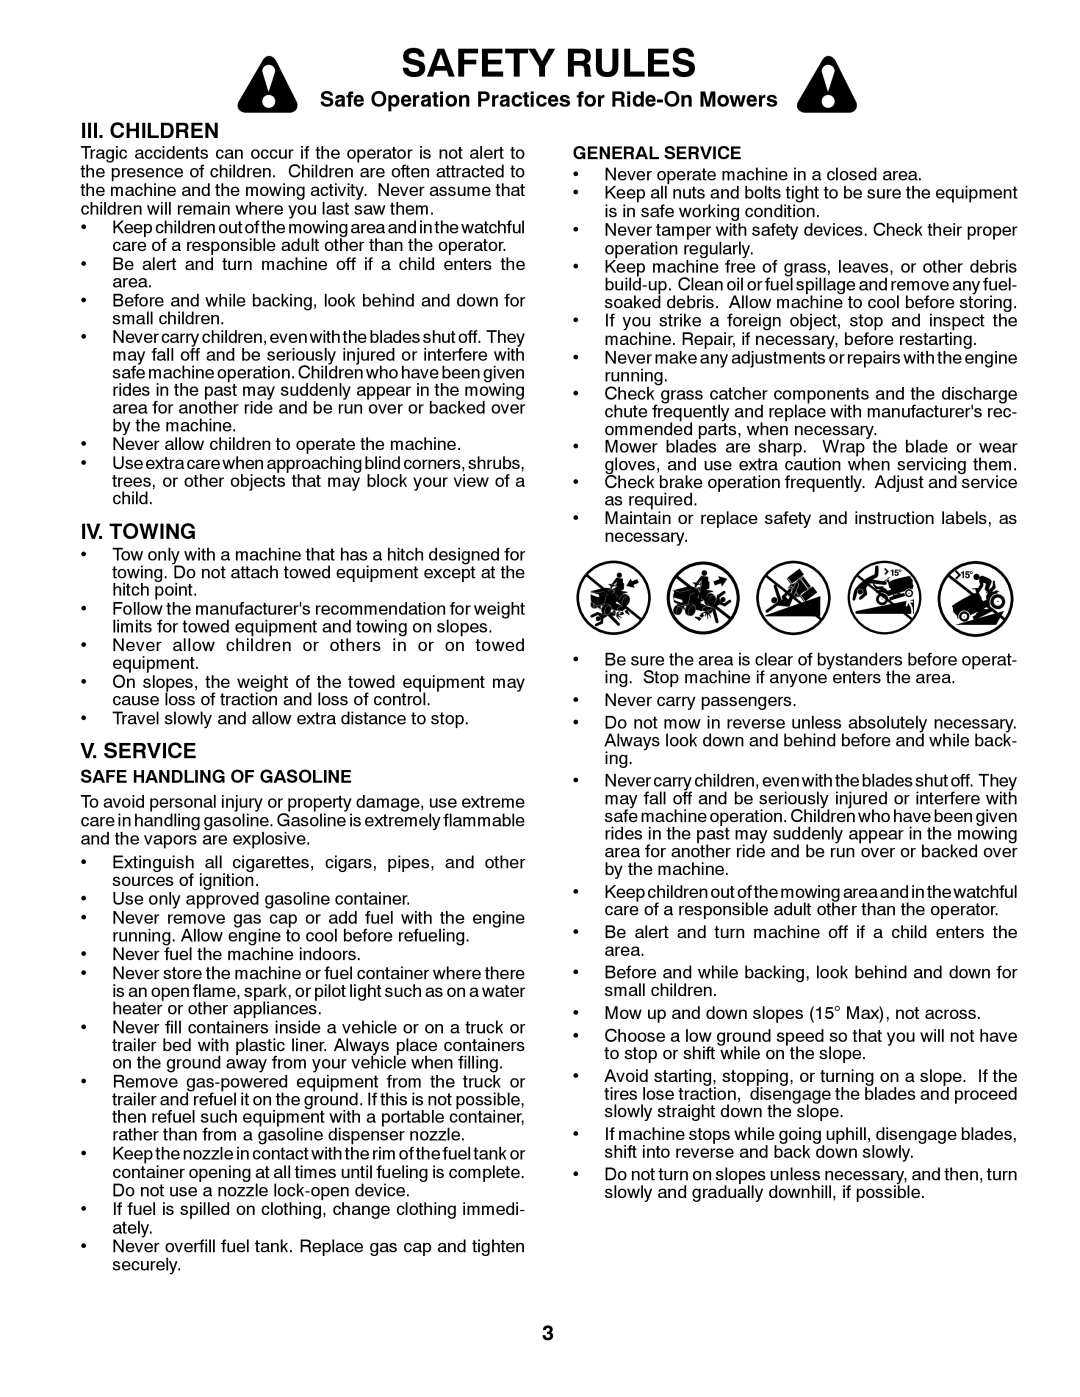 Husqvarna 532 43 38-61 Iii. Children, Iv. Towing, V. Service, Safety Rules, Safe Operation Practices for Ride-On Mowers 